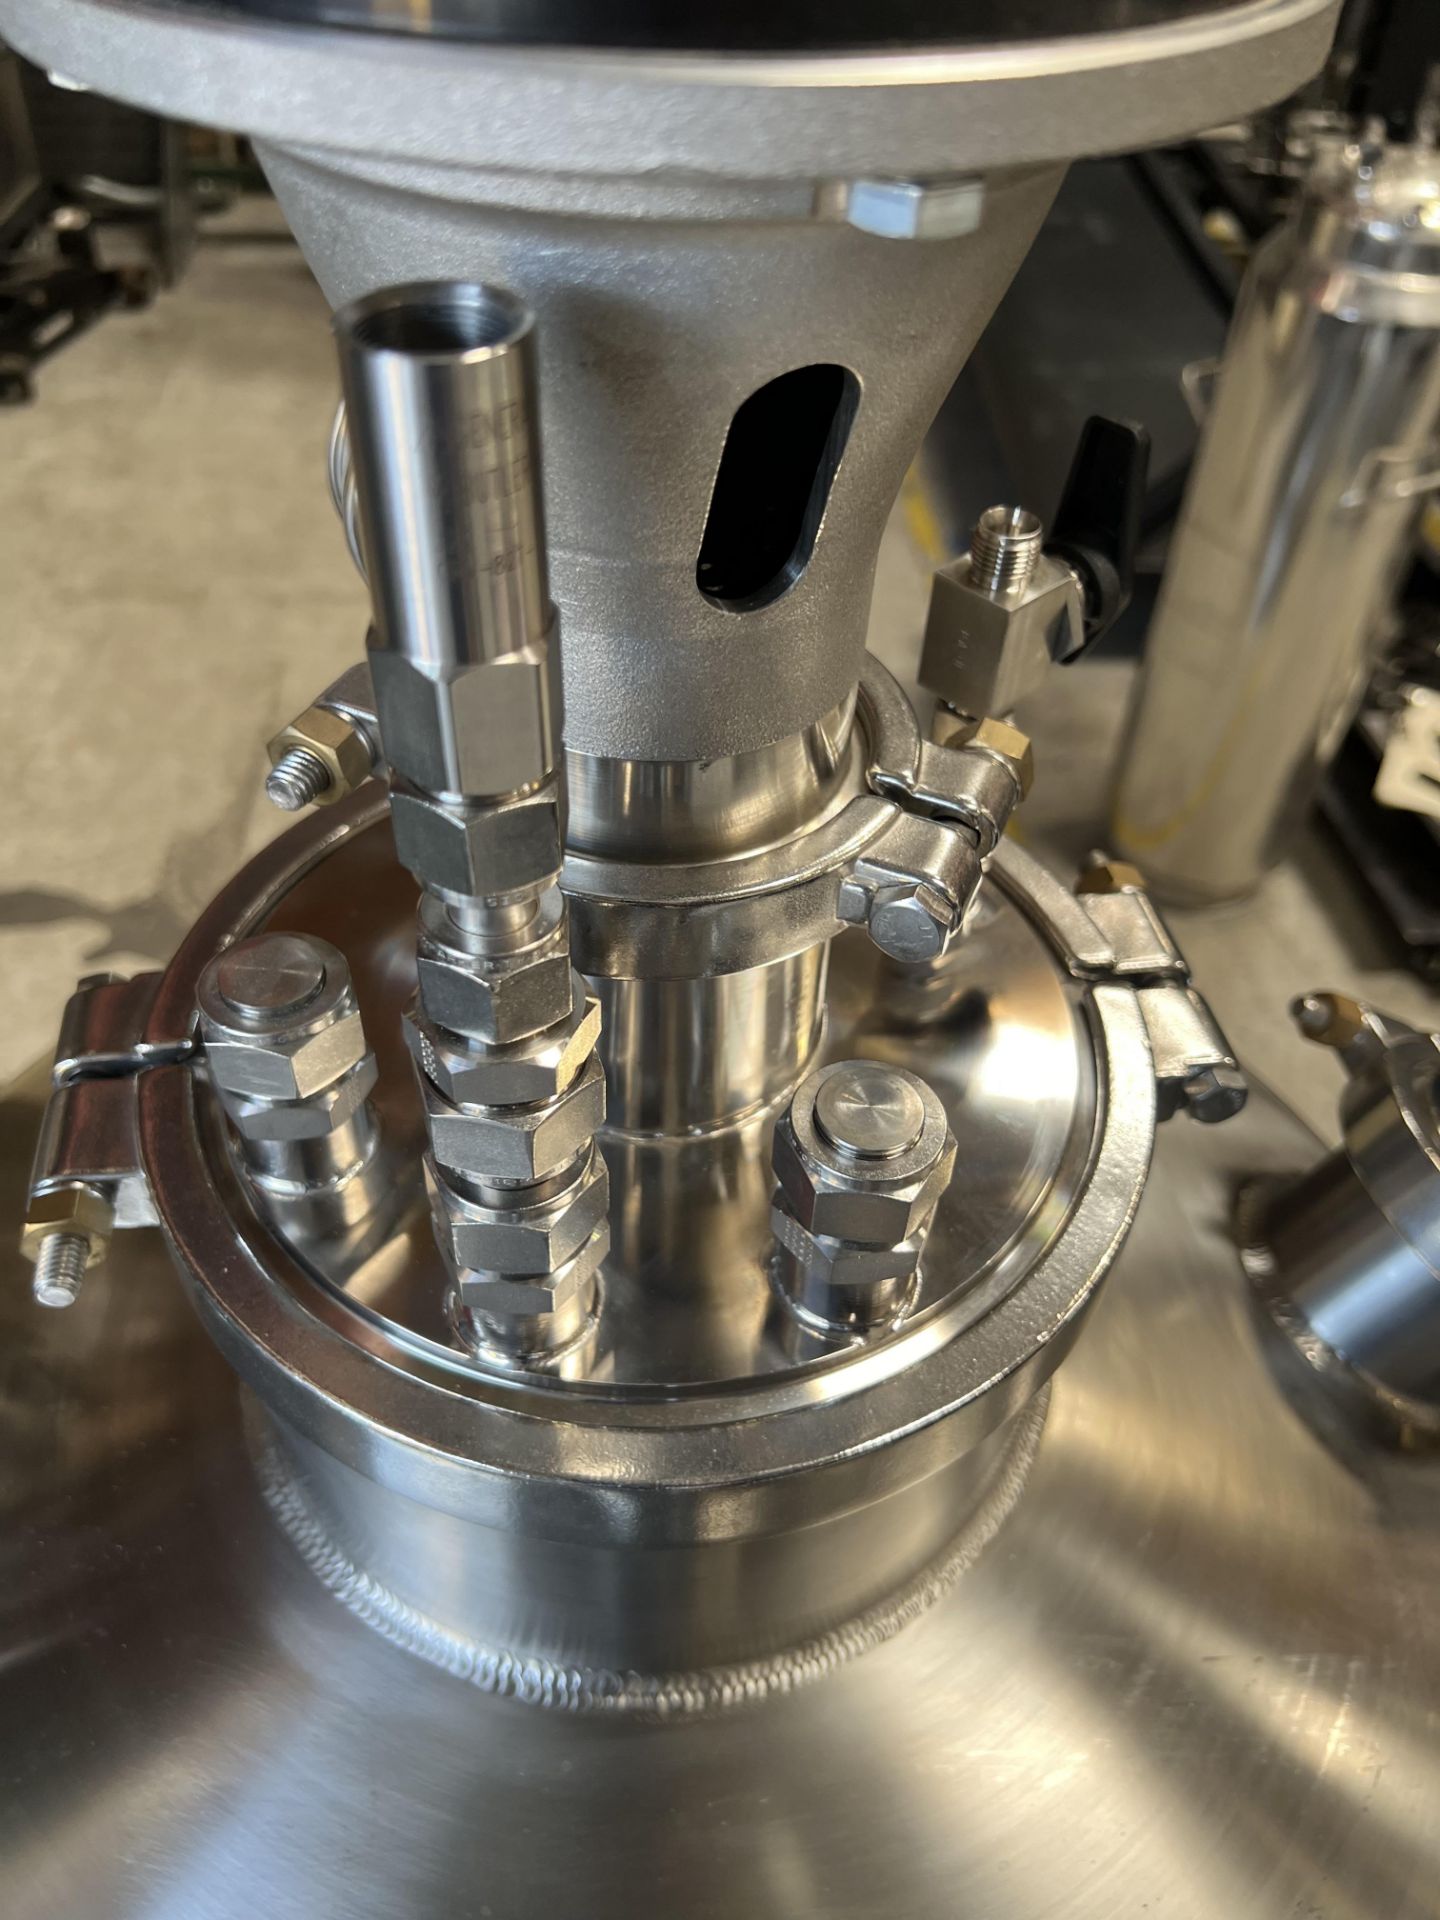 New/Unused Precision Extraction Solutions 100 L Multi-Use Reactor Vessel. Model RV-100L - Image 6 of 9